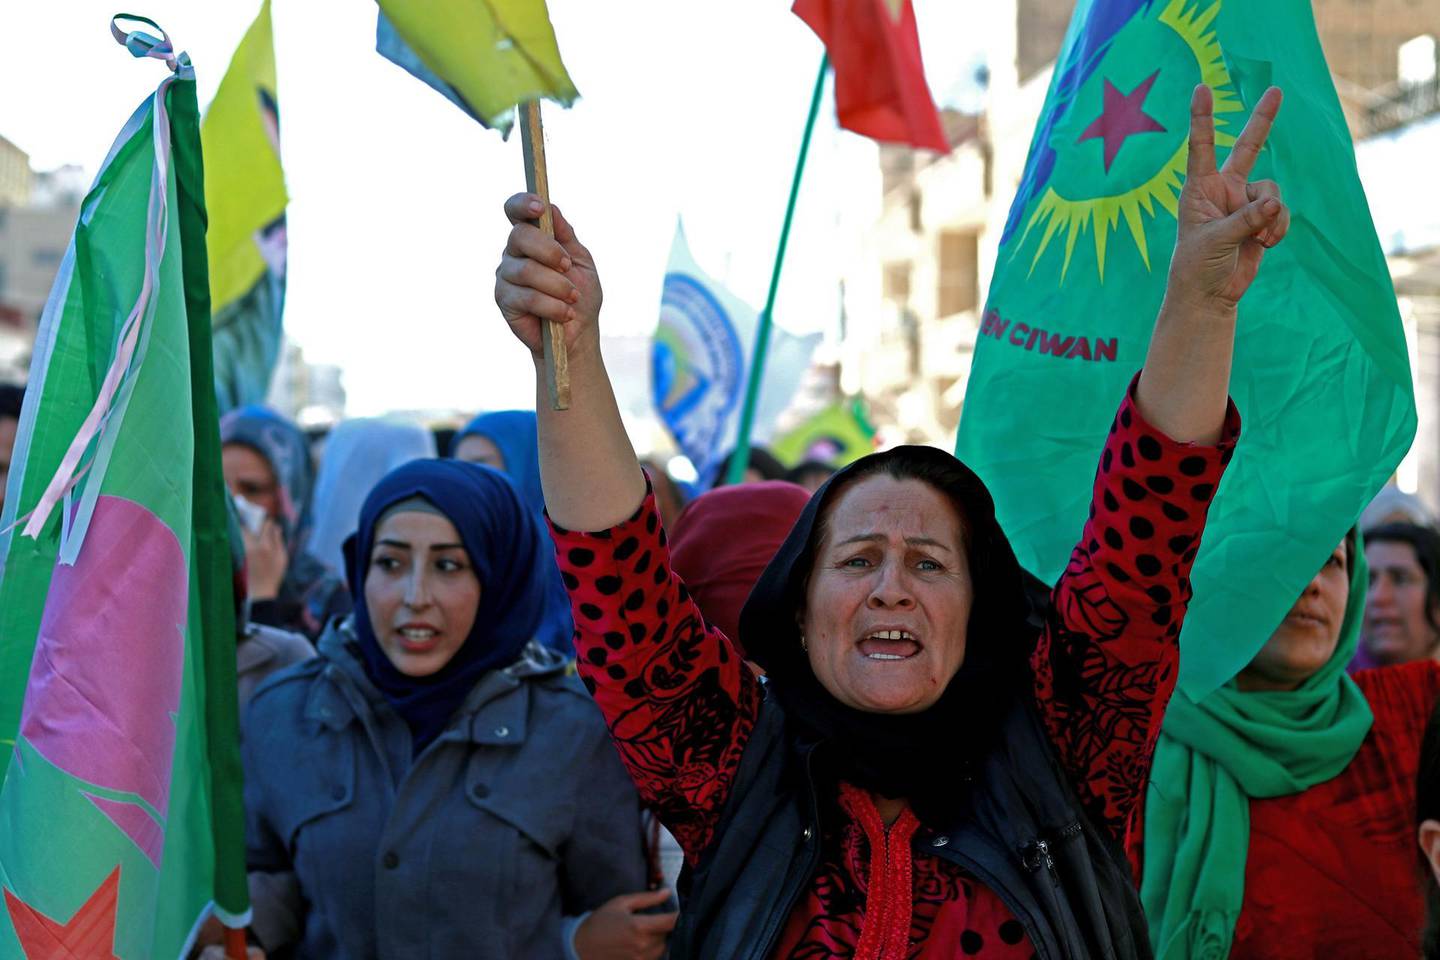 Syrian kurds demonstrate in Qamishli against Turkish shelling of Kurdish militia posts in northern Syria, on October 31, 2018. A Kurdish-led force backed by the US-led coalition said on October 31 it was suspending operations against the Islamic State group after Turkish shelling of Kurdish militia posts in northern Syria. The Syrian Democratic Forces, joint Arab-Kurdish units led by the Kurds, announced a "temporary halt" to its operation launched in eastern Syria on September 10 while condemning the "provocations" of Turkey. / AFP / Delil SOULEIMAN
